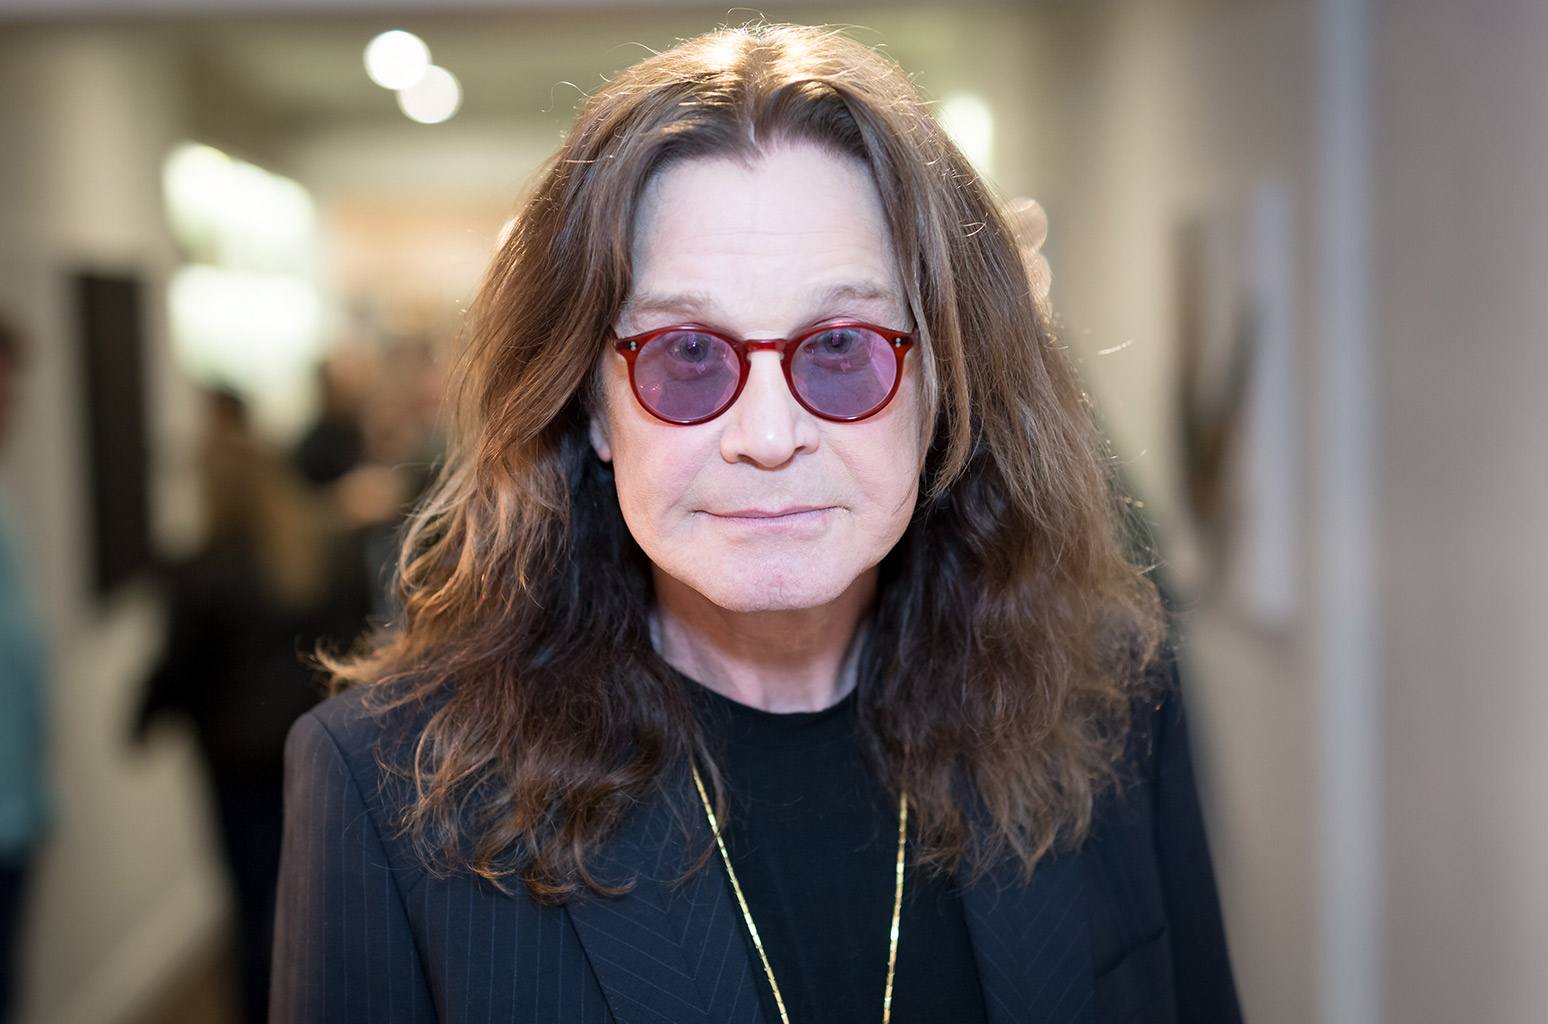 Ozzy Osbourne Says Fans' Well-Wishes After Parkinson's Disease Diagnosis Means 'The Absolute World to Me'